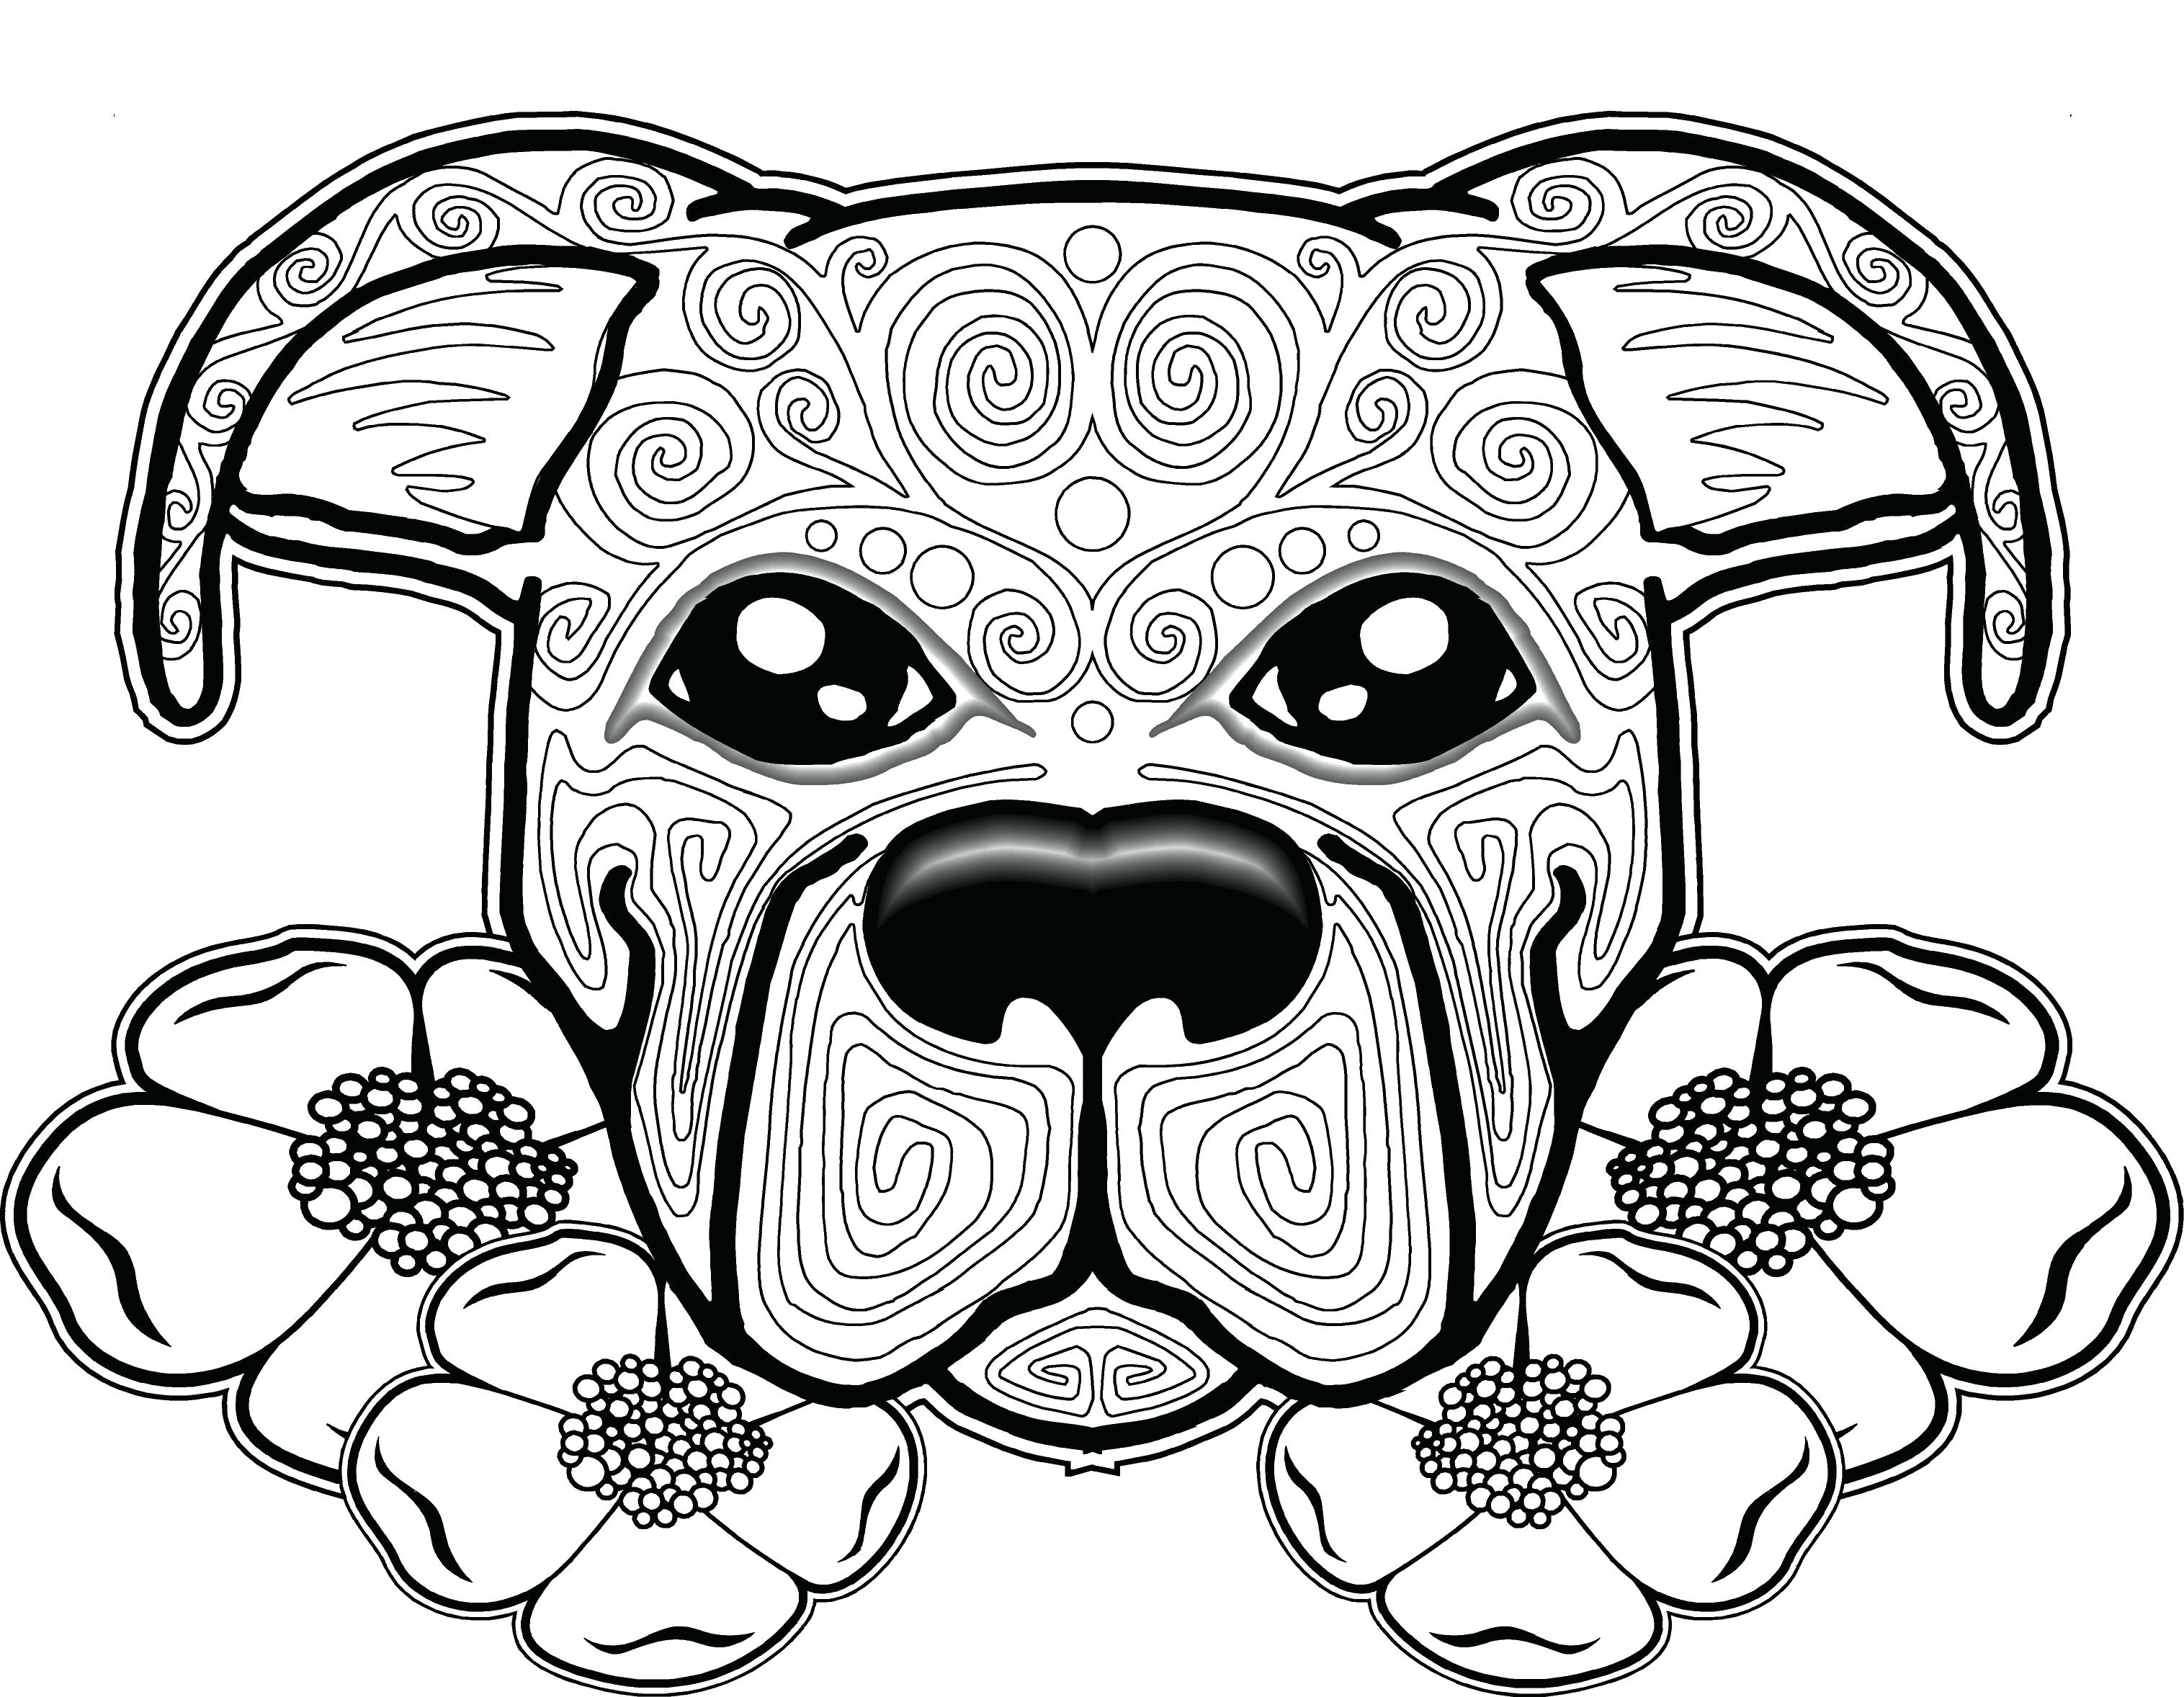 pitbull-puppy-coloring-pages-at-getcolorings-free-printable-colorings-pages-to-print-and-color